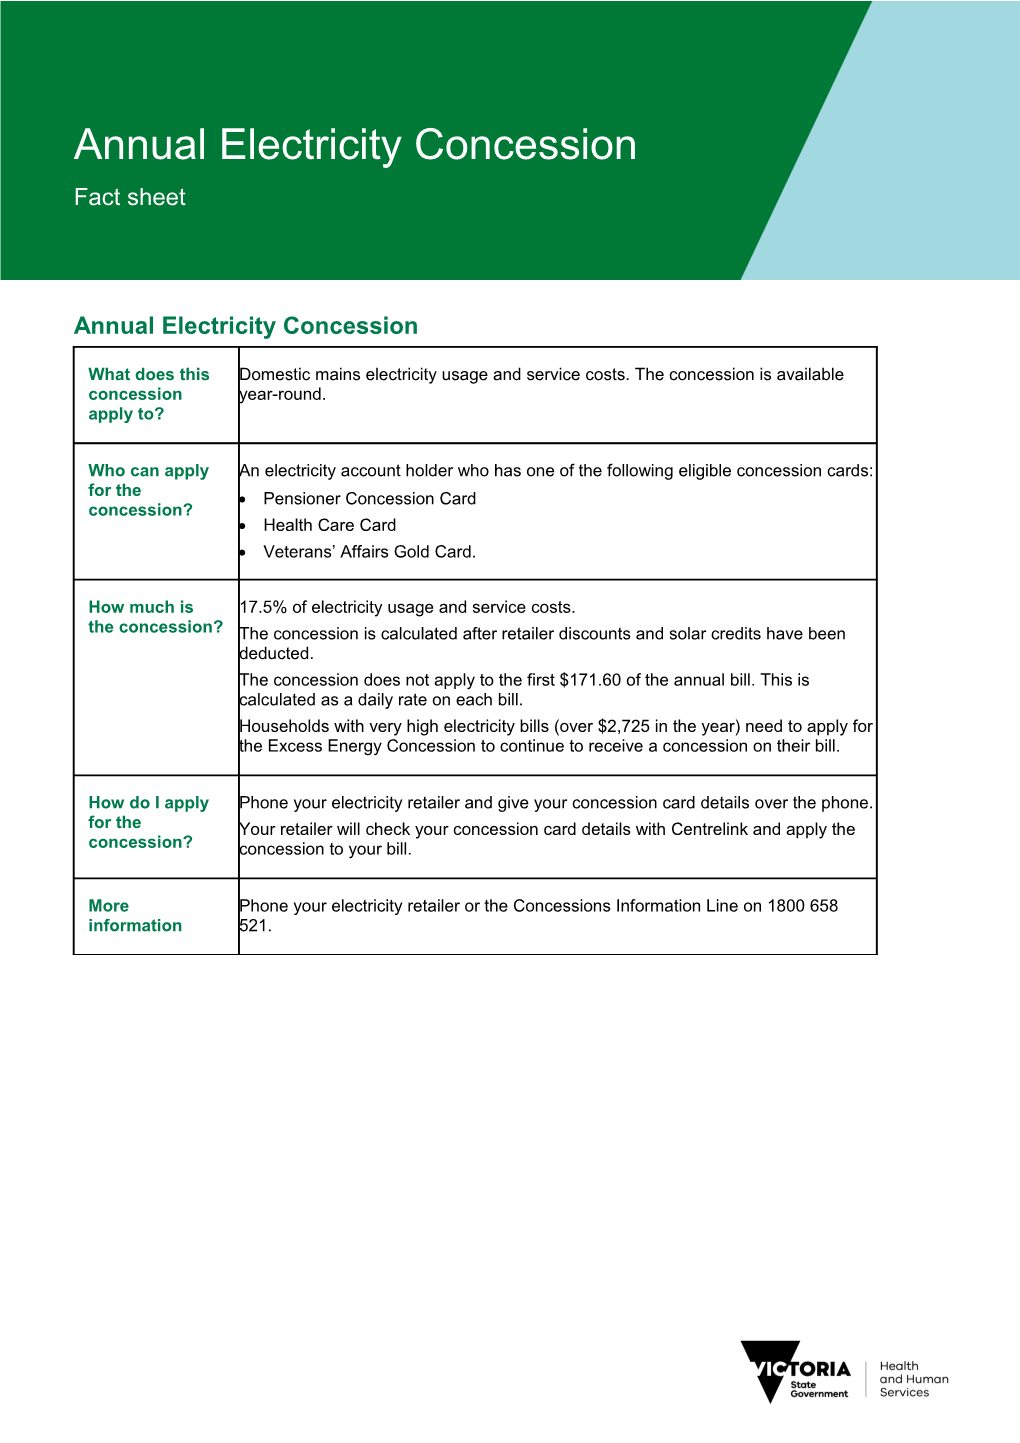 Annual Electricity Concession